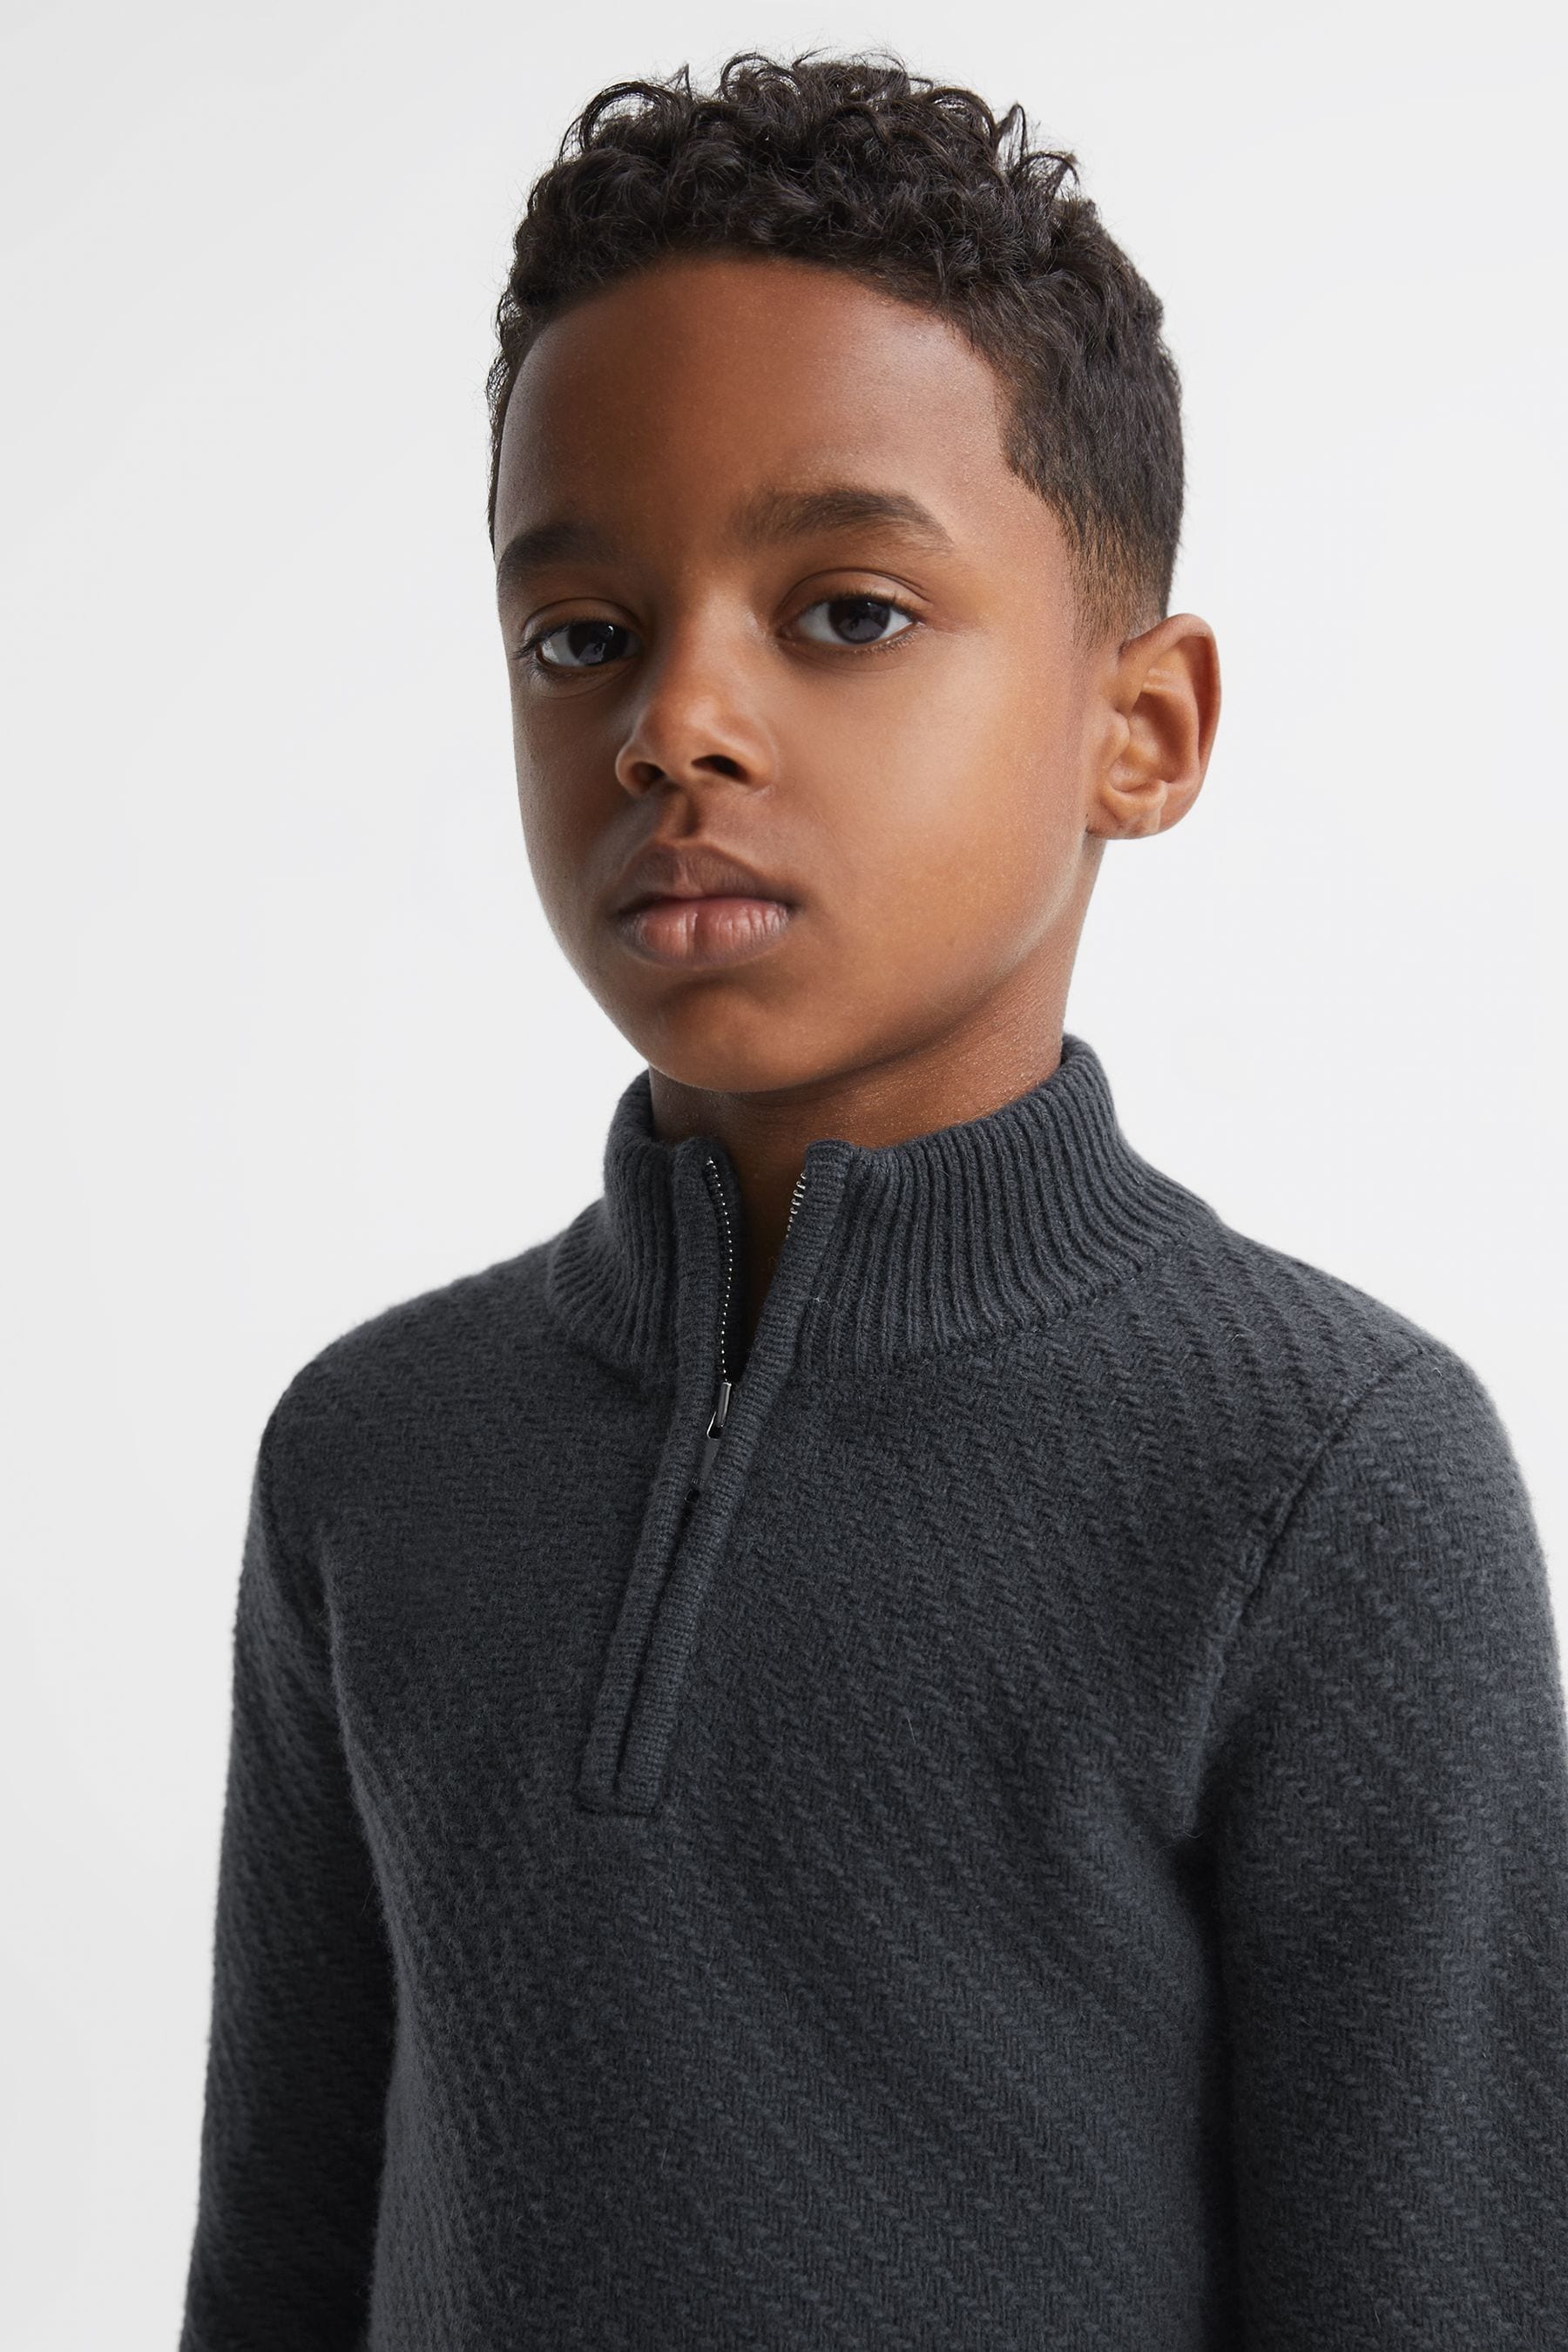 Reiss Kids' Tempo - Anthracite Grey Junior Slim Fit Knitted Half-zip Funnel Neck Jumper, Age 6-7 Years